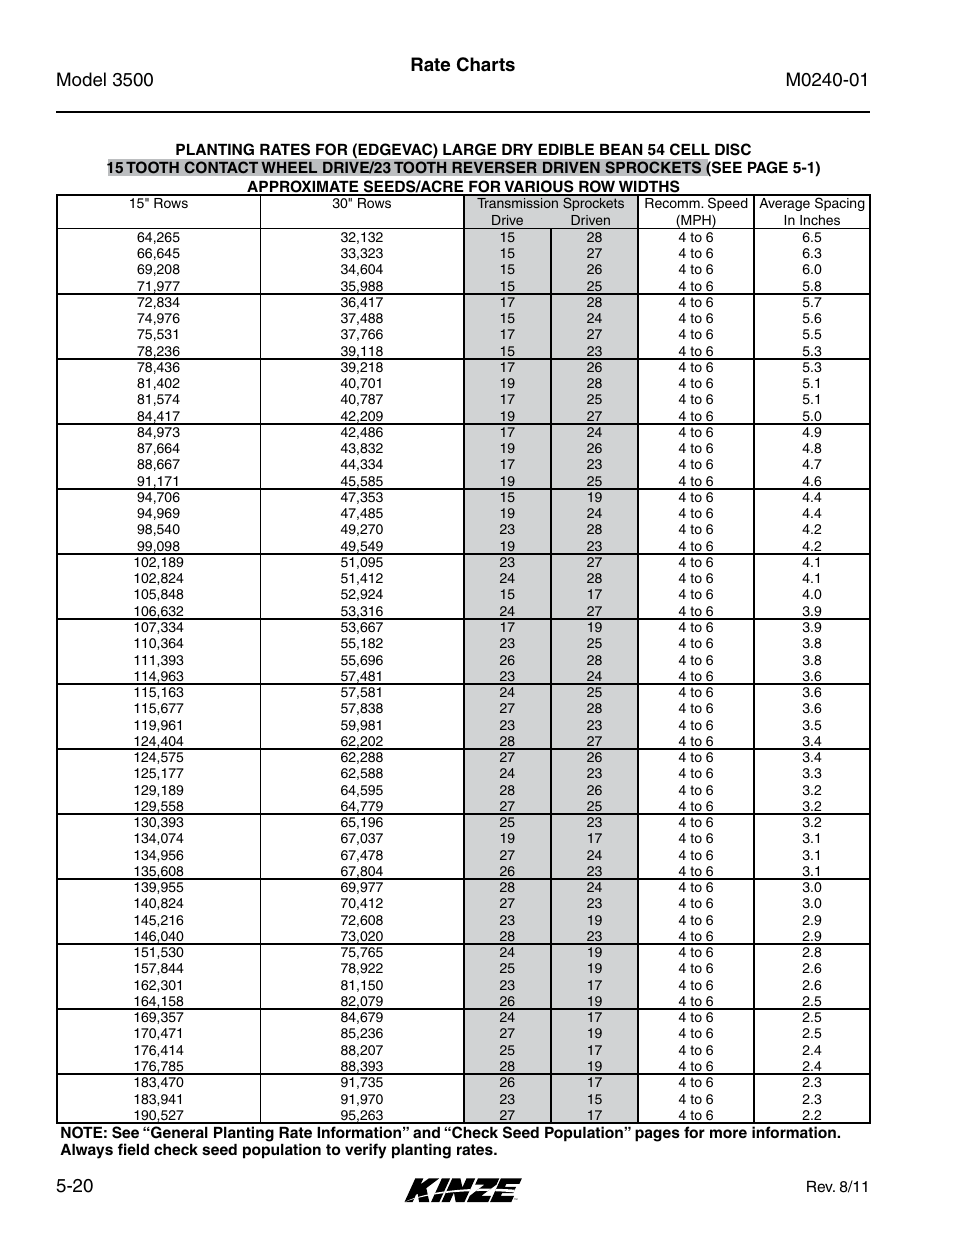 Rate charts | Kinze 3500 Lift and Rotate Planter Rev. 7/14 User Manual | Page 90 / 140